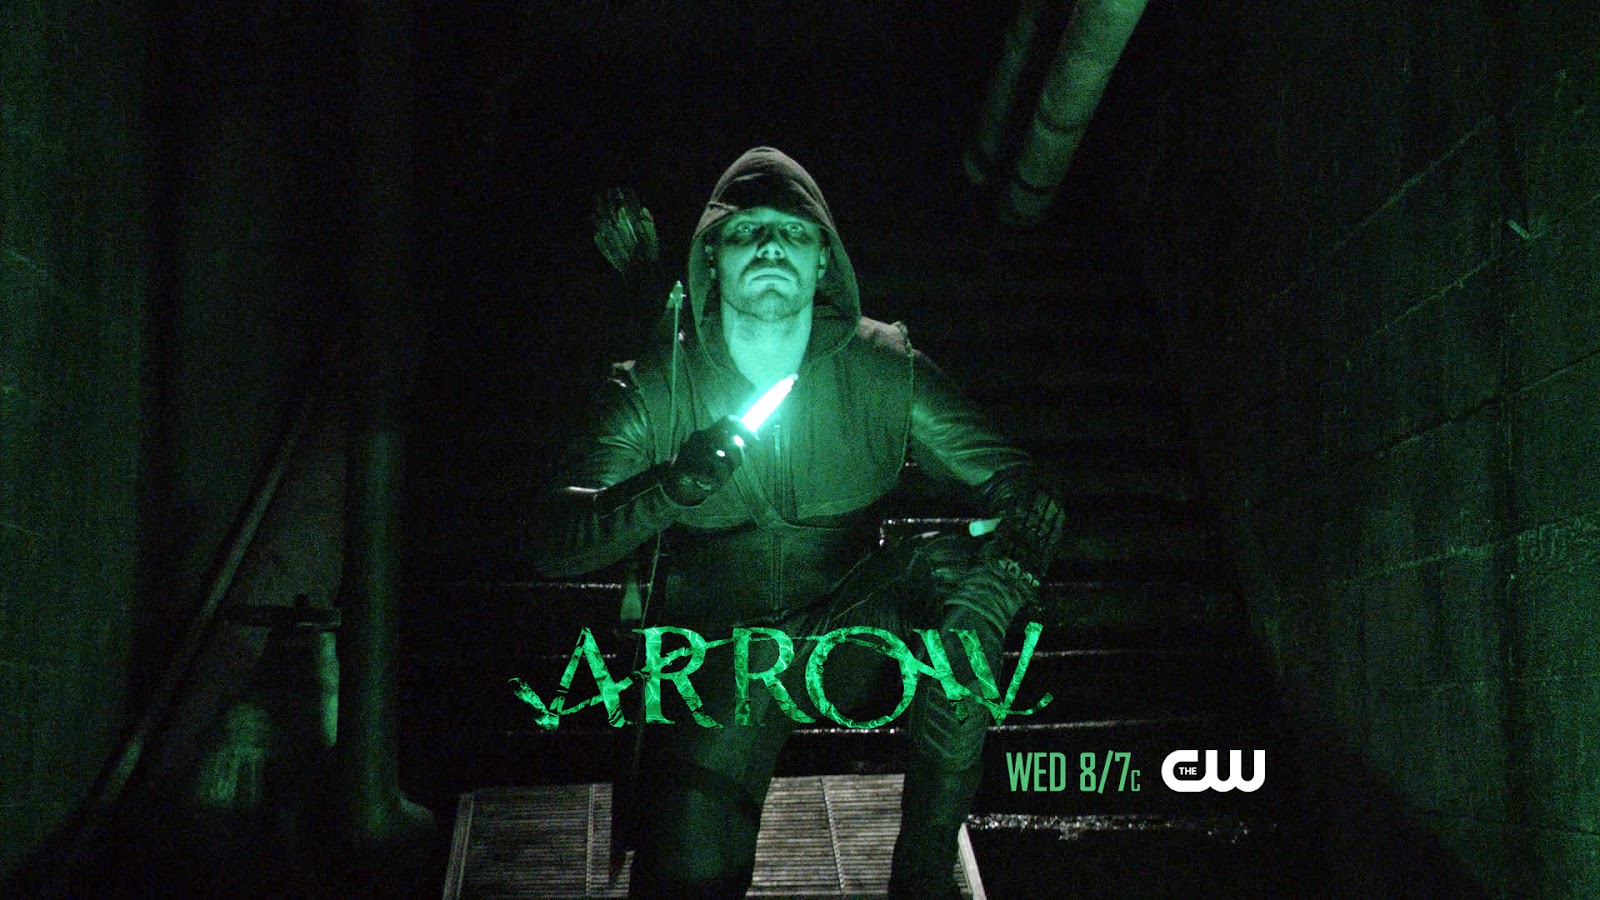 HD Widescreen Wallpaper Of Arrow From The Above